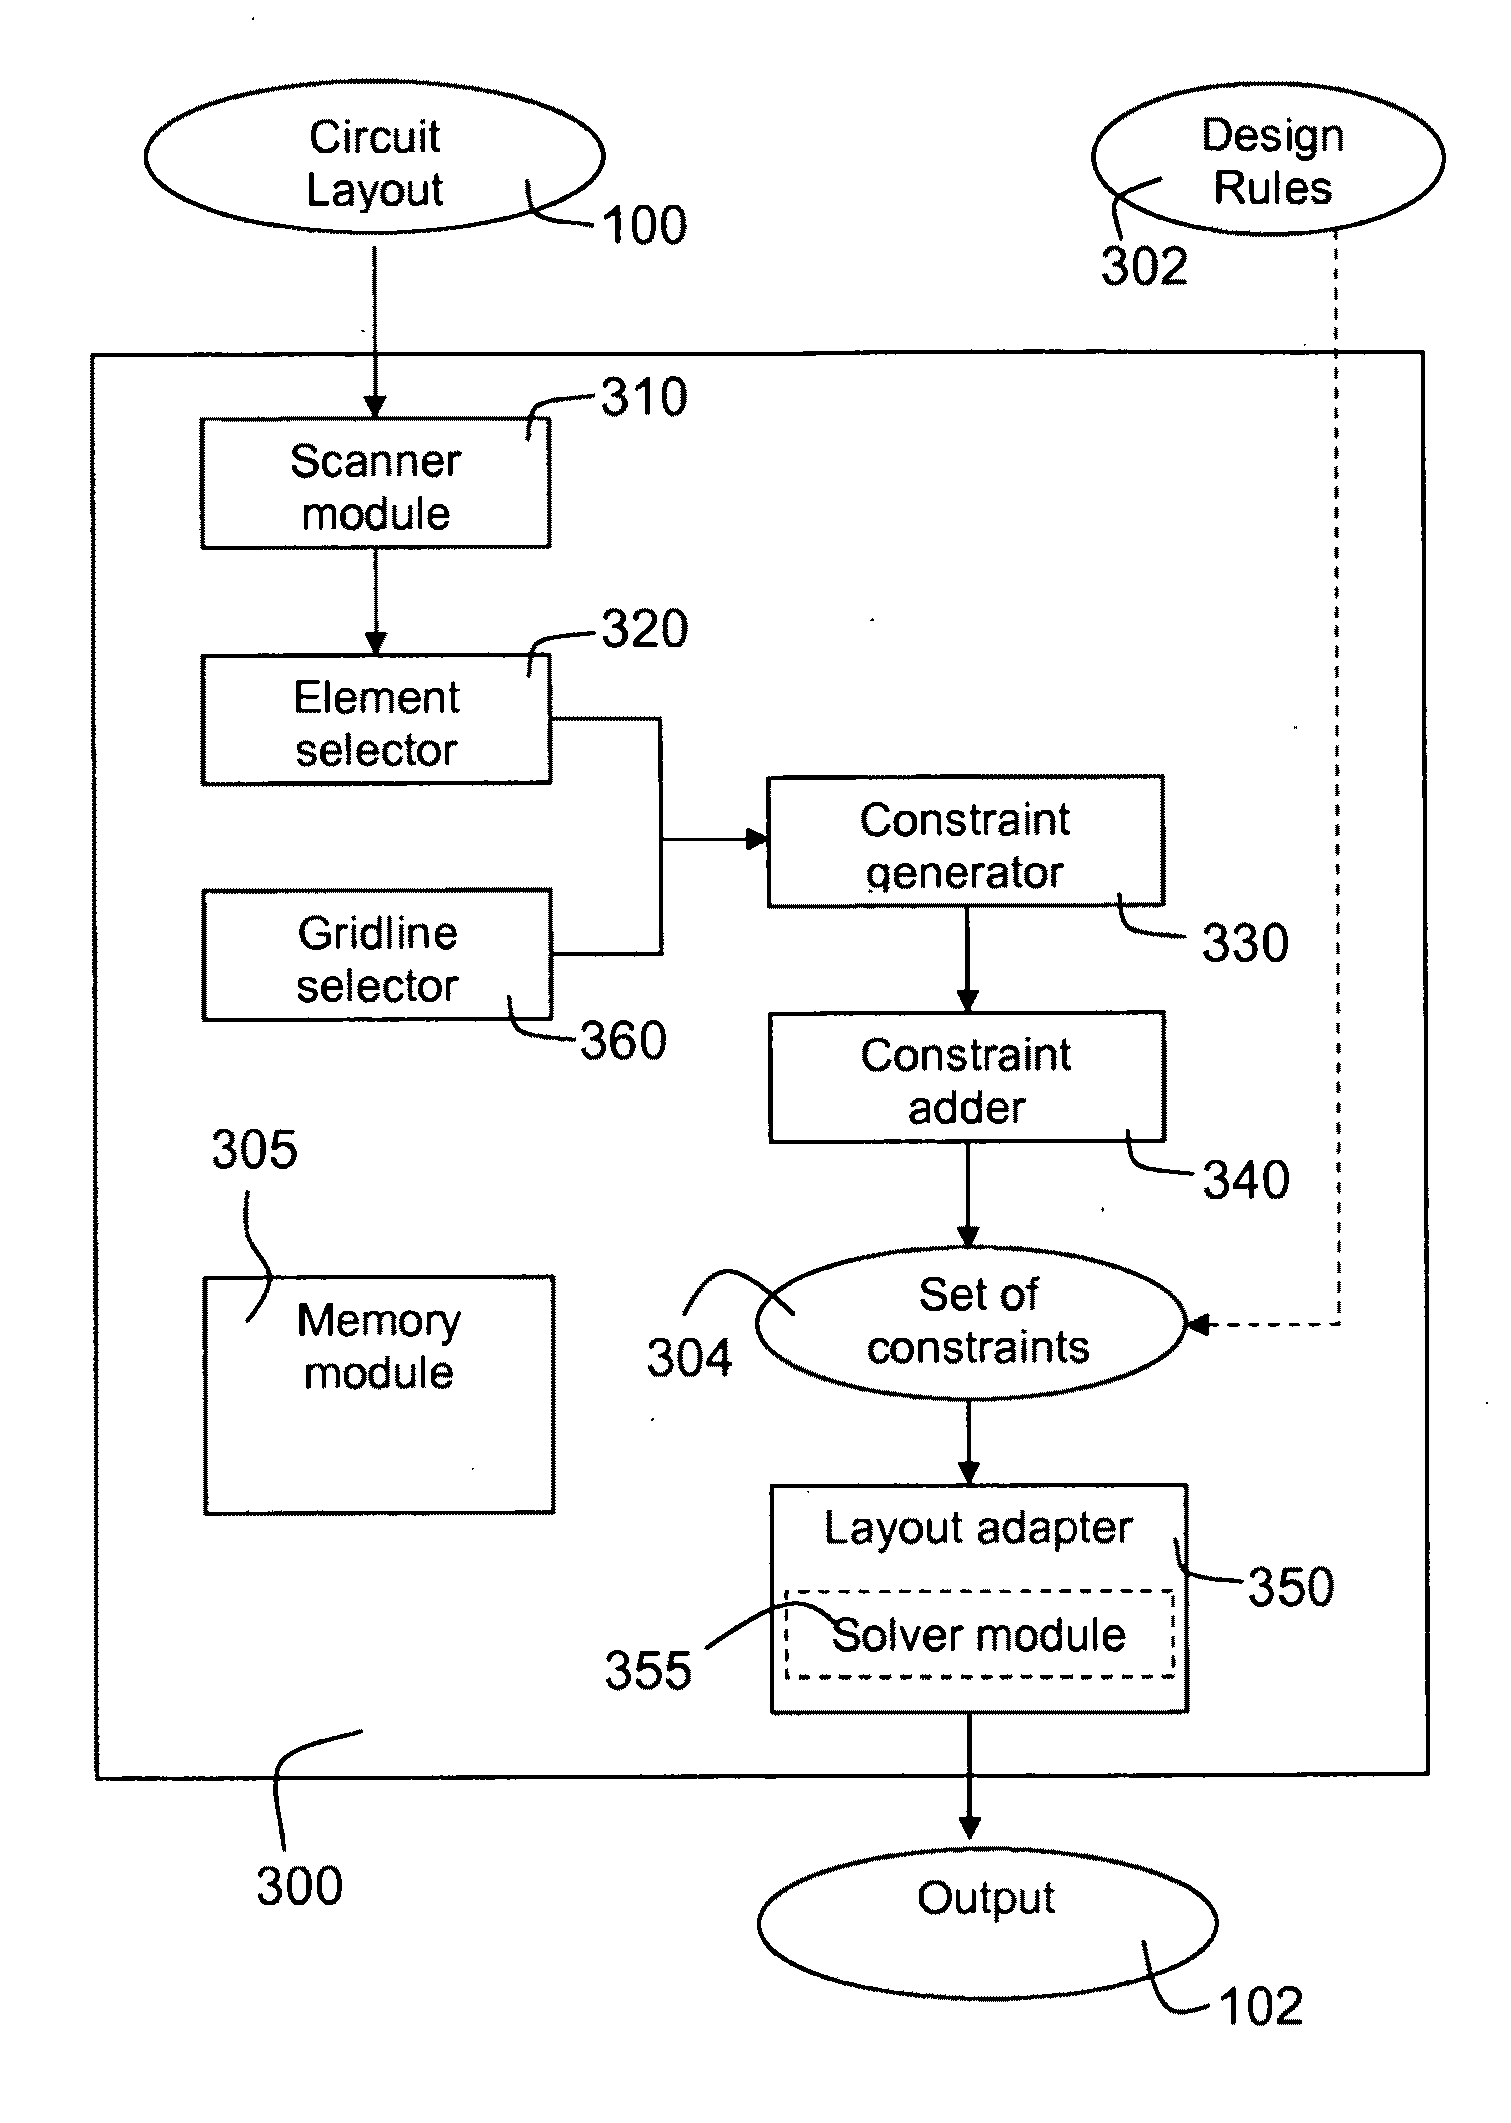 Method and system for adapting a circuit layout to a predefined grid